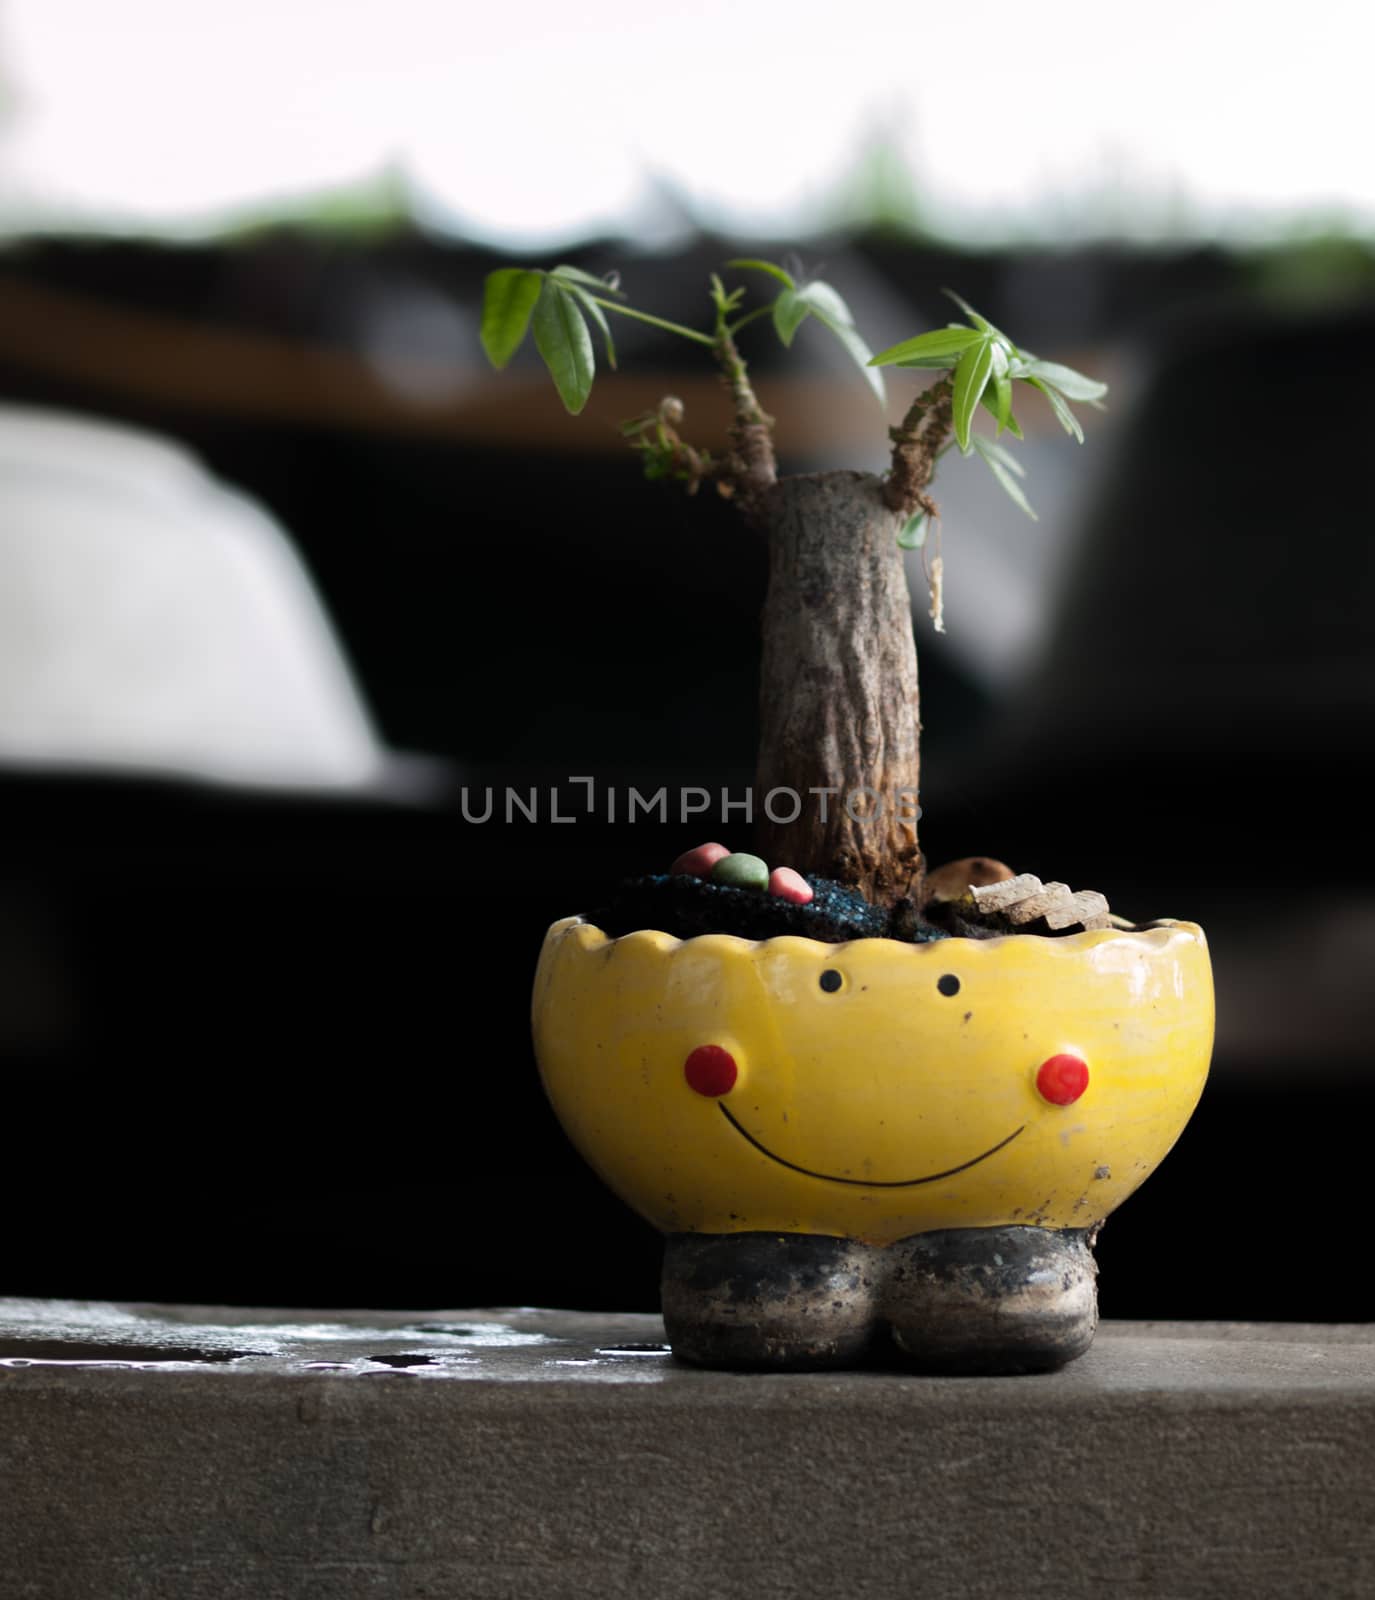 COLOR PHOTO OF SMALL TREE GROWN IN SMILEY-POT